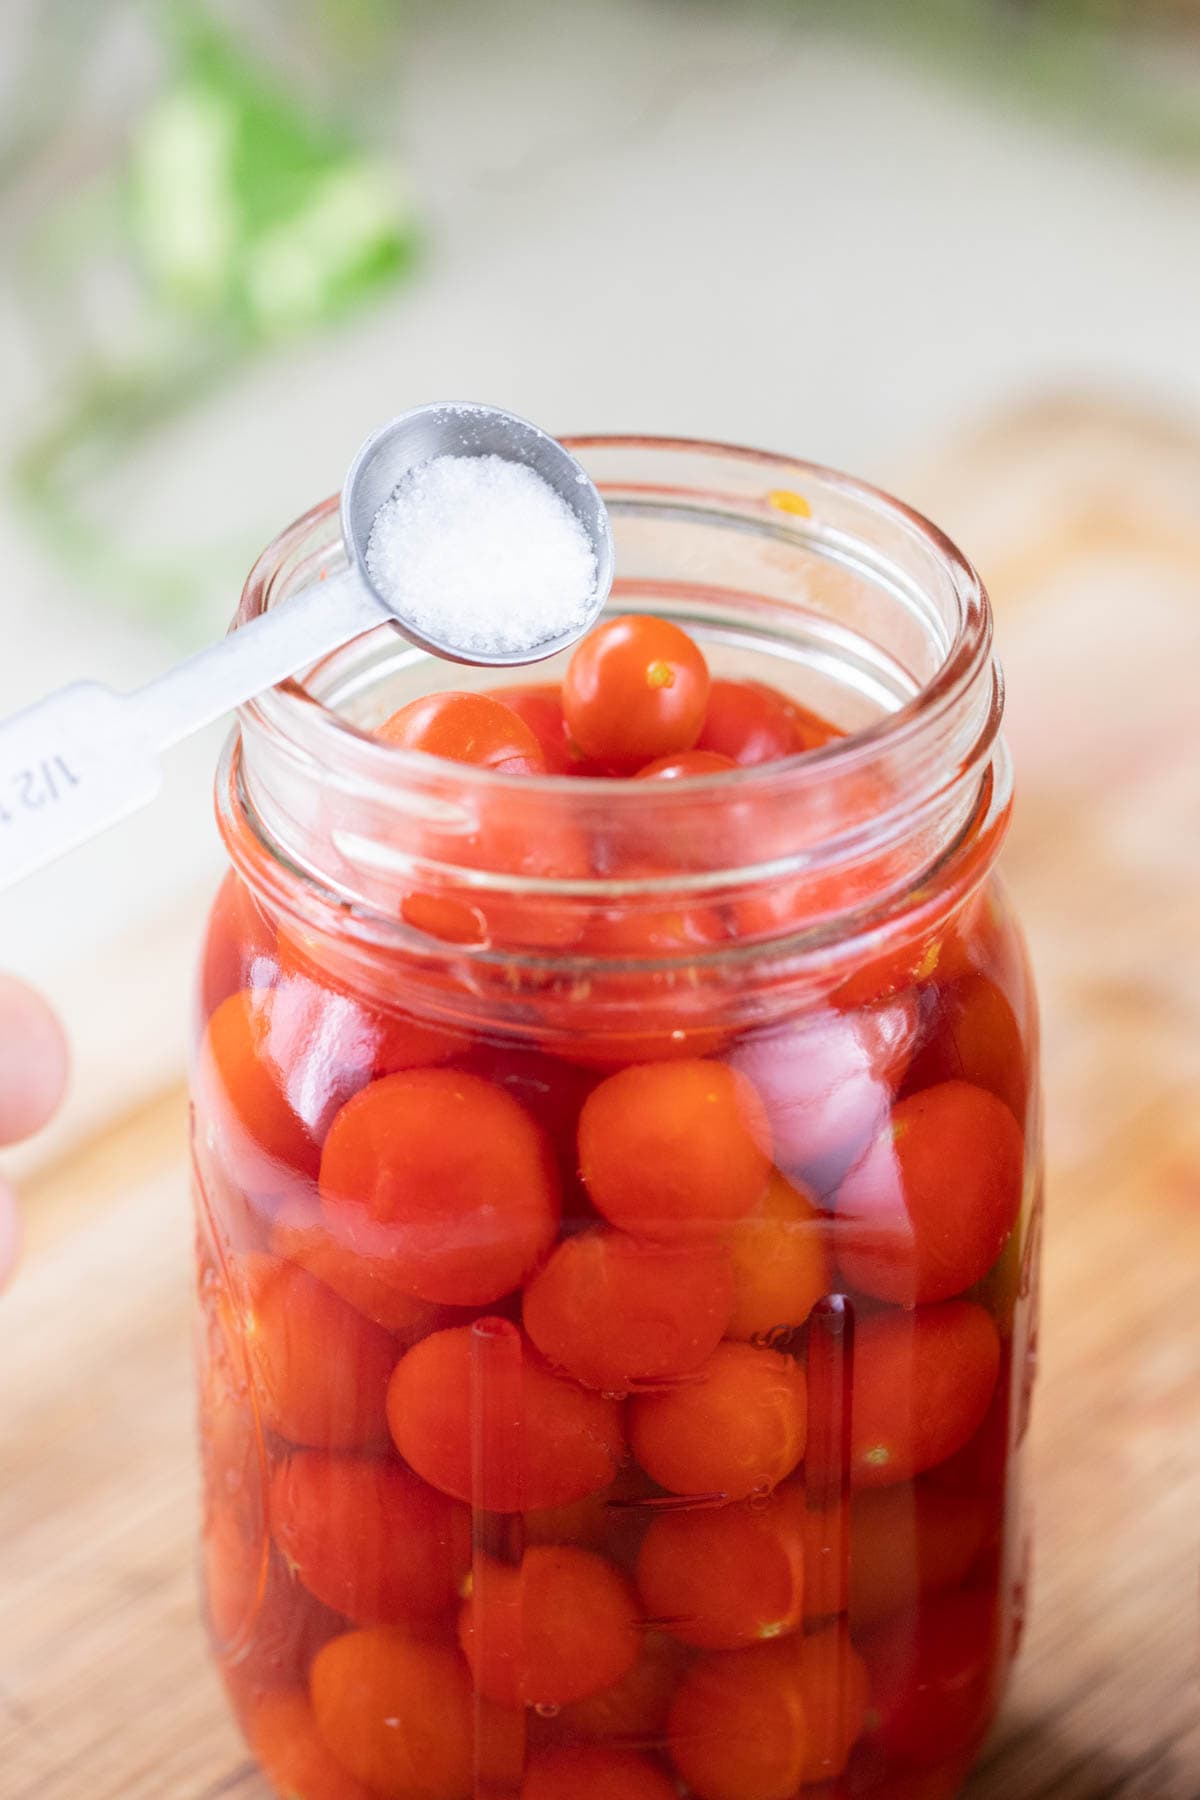 Adding citric acid and boiling water to the jars of cherry tomatoes.